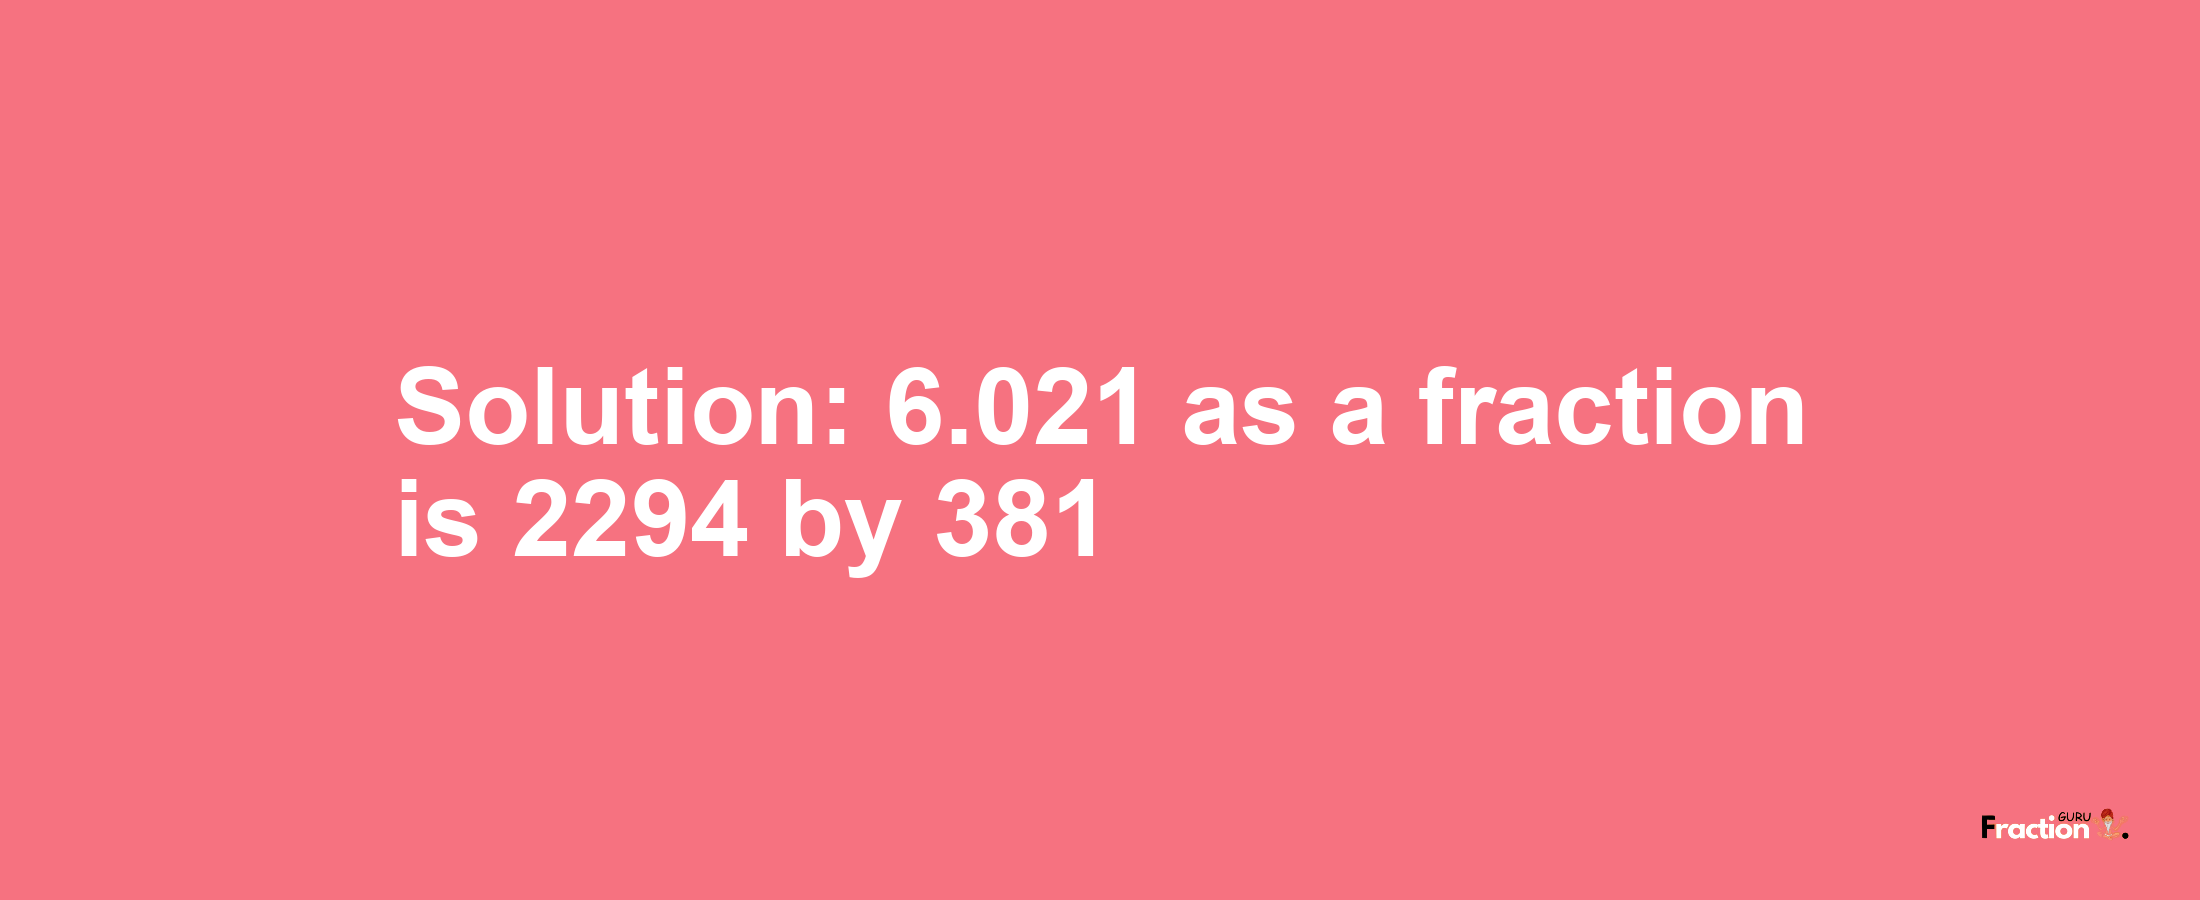 Solution:6.021 as a fraction is 2294/381